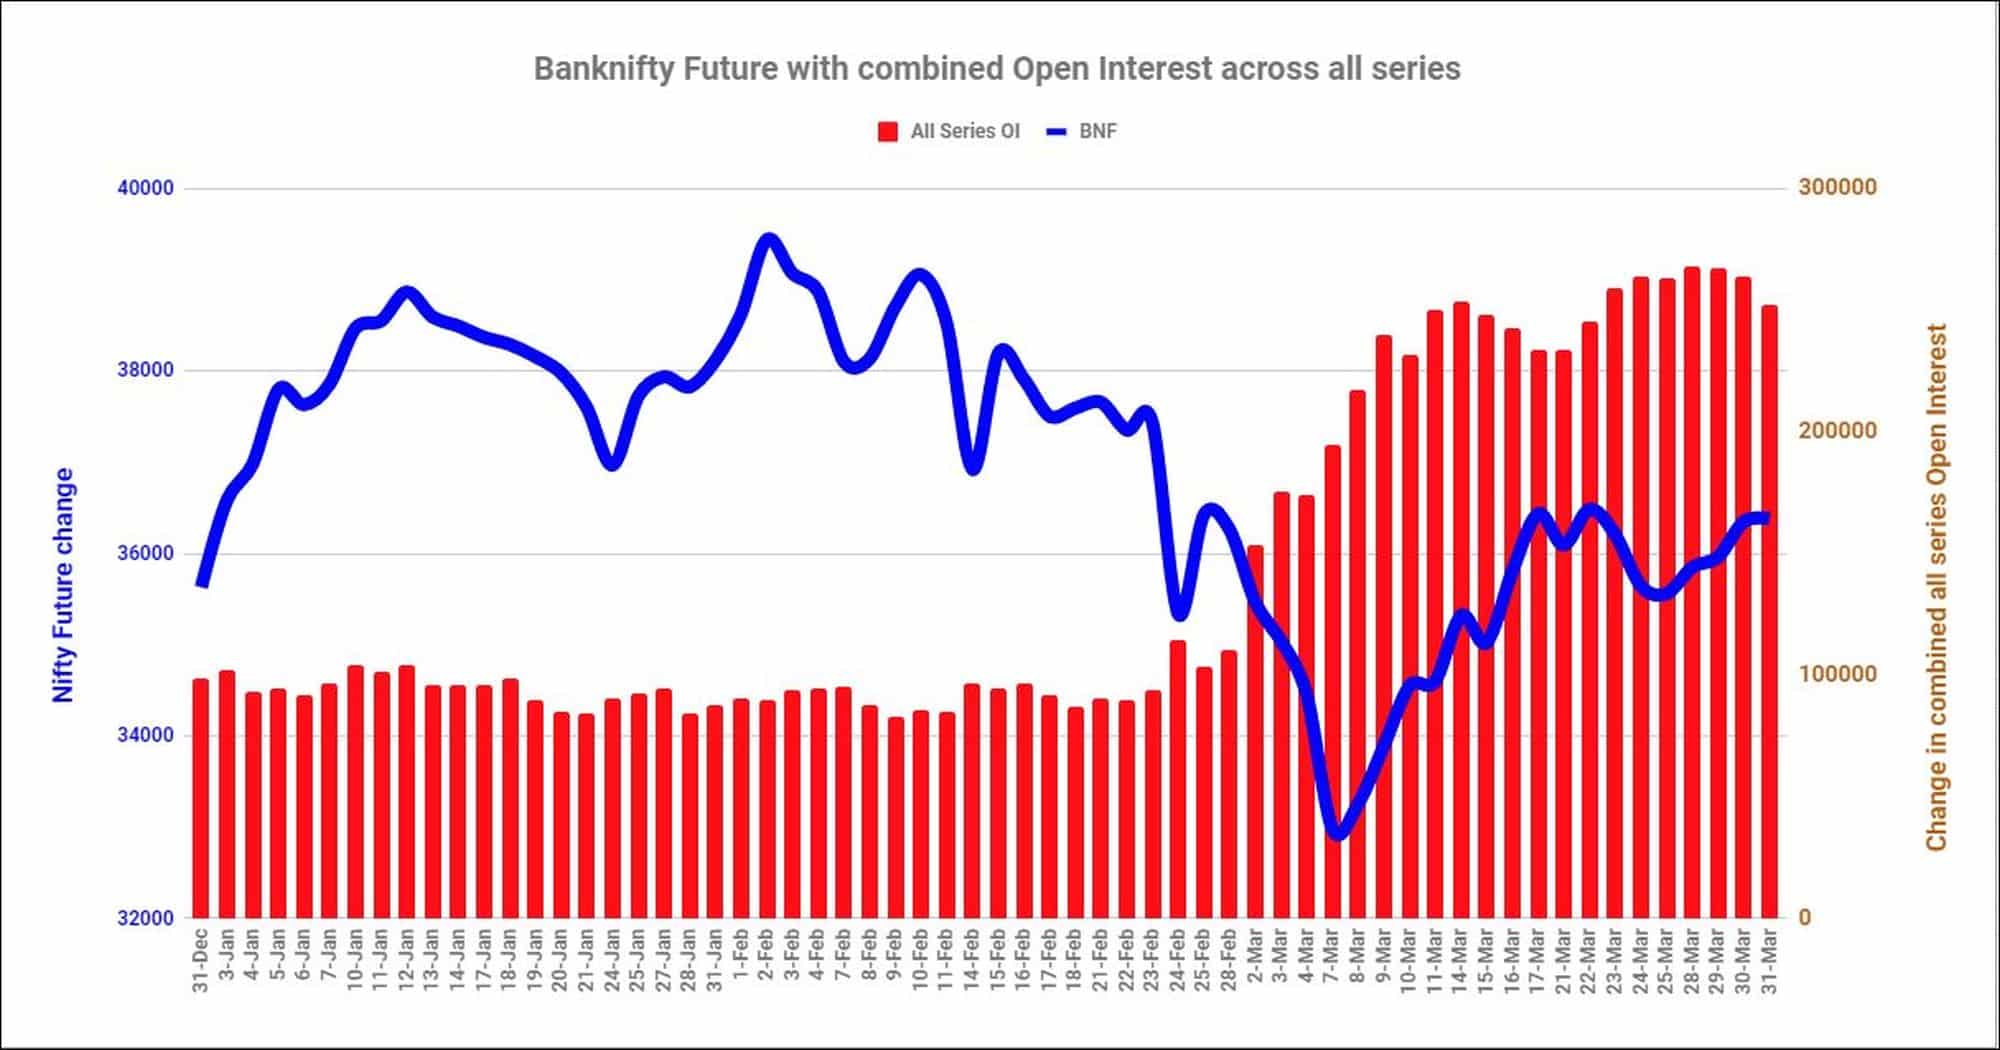 Bnf31Mar Nifty And Banknifty Futures With All Series Combined Open Interest – 31St Mar 2022 Banknifty, Futures, Nifty, Open Interest